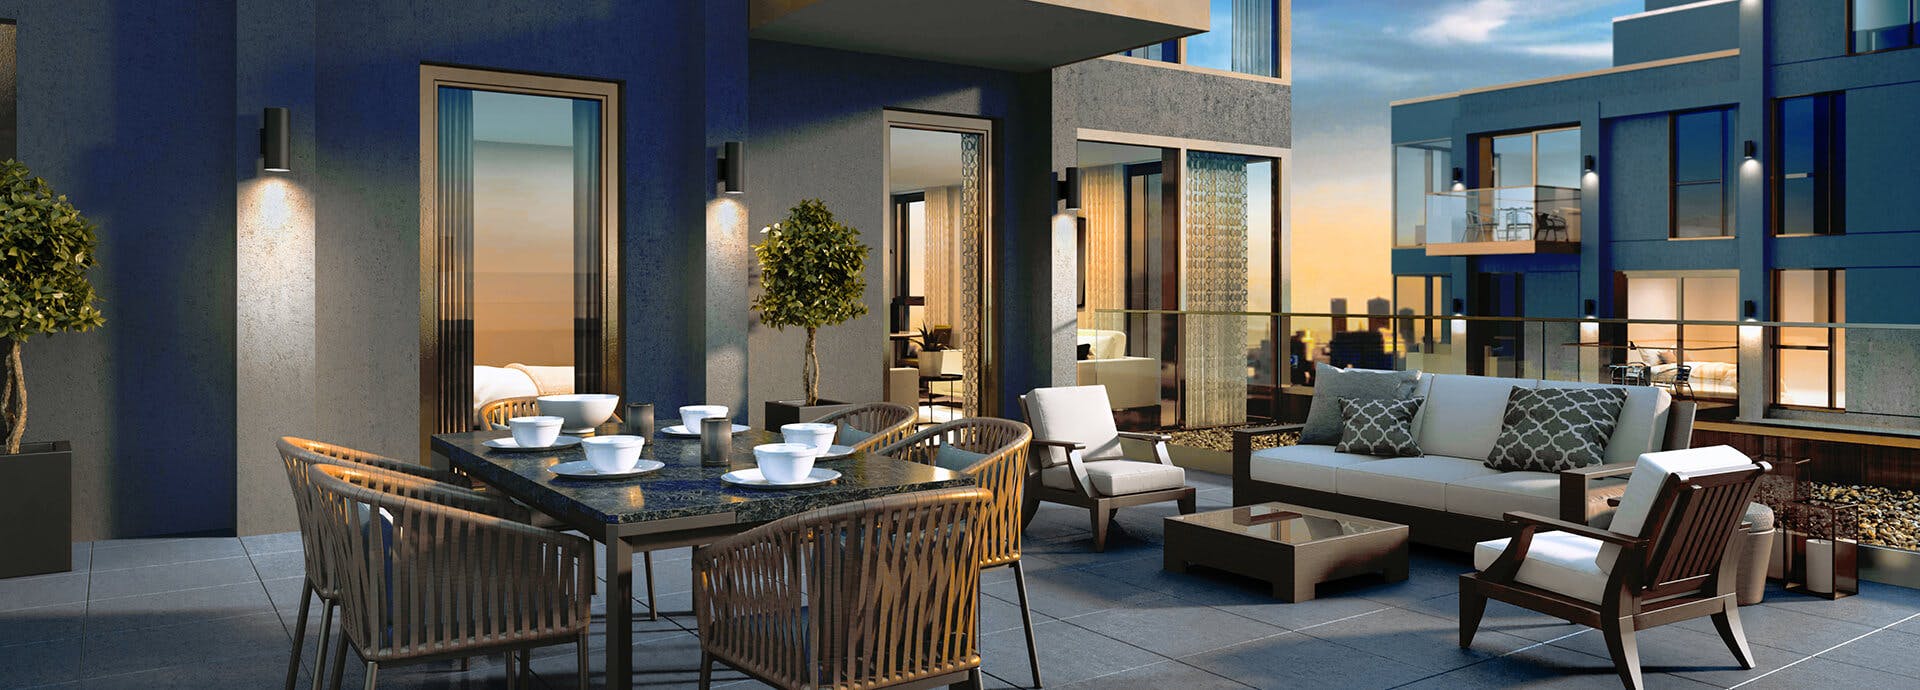 Large high rise patio in the evening with variety of couches and tables and sconce lights